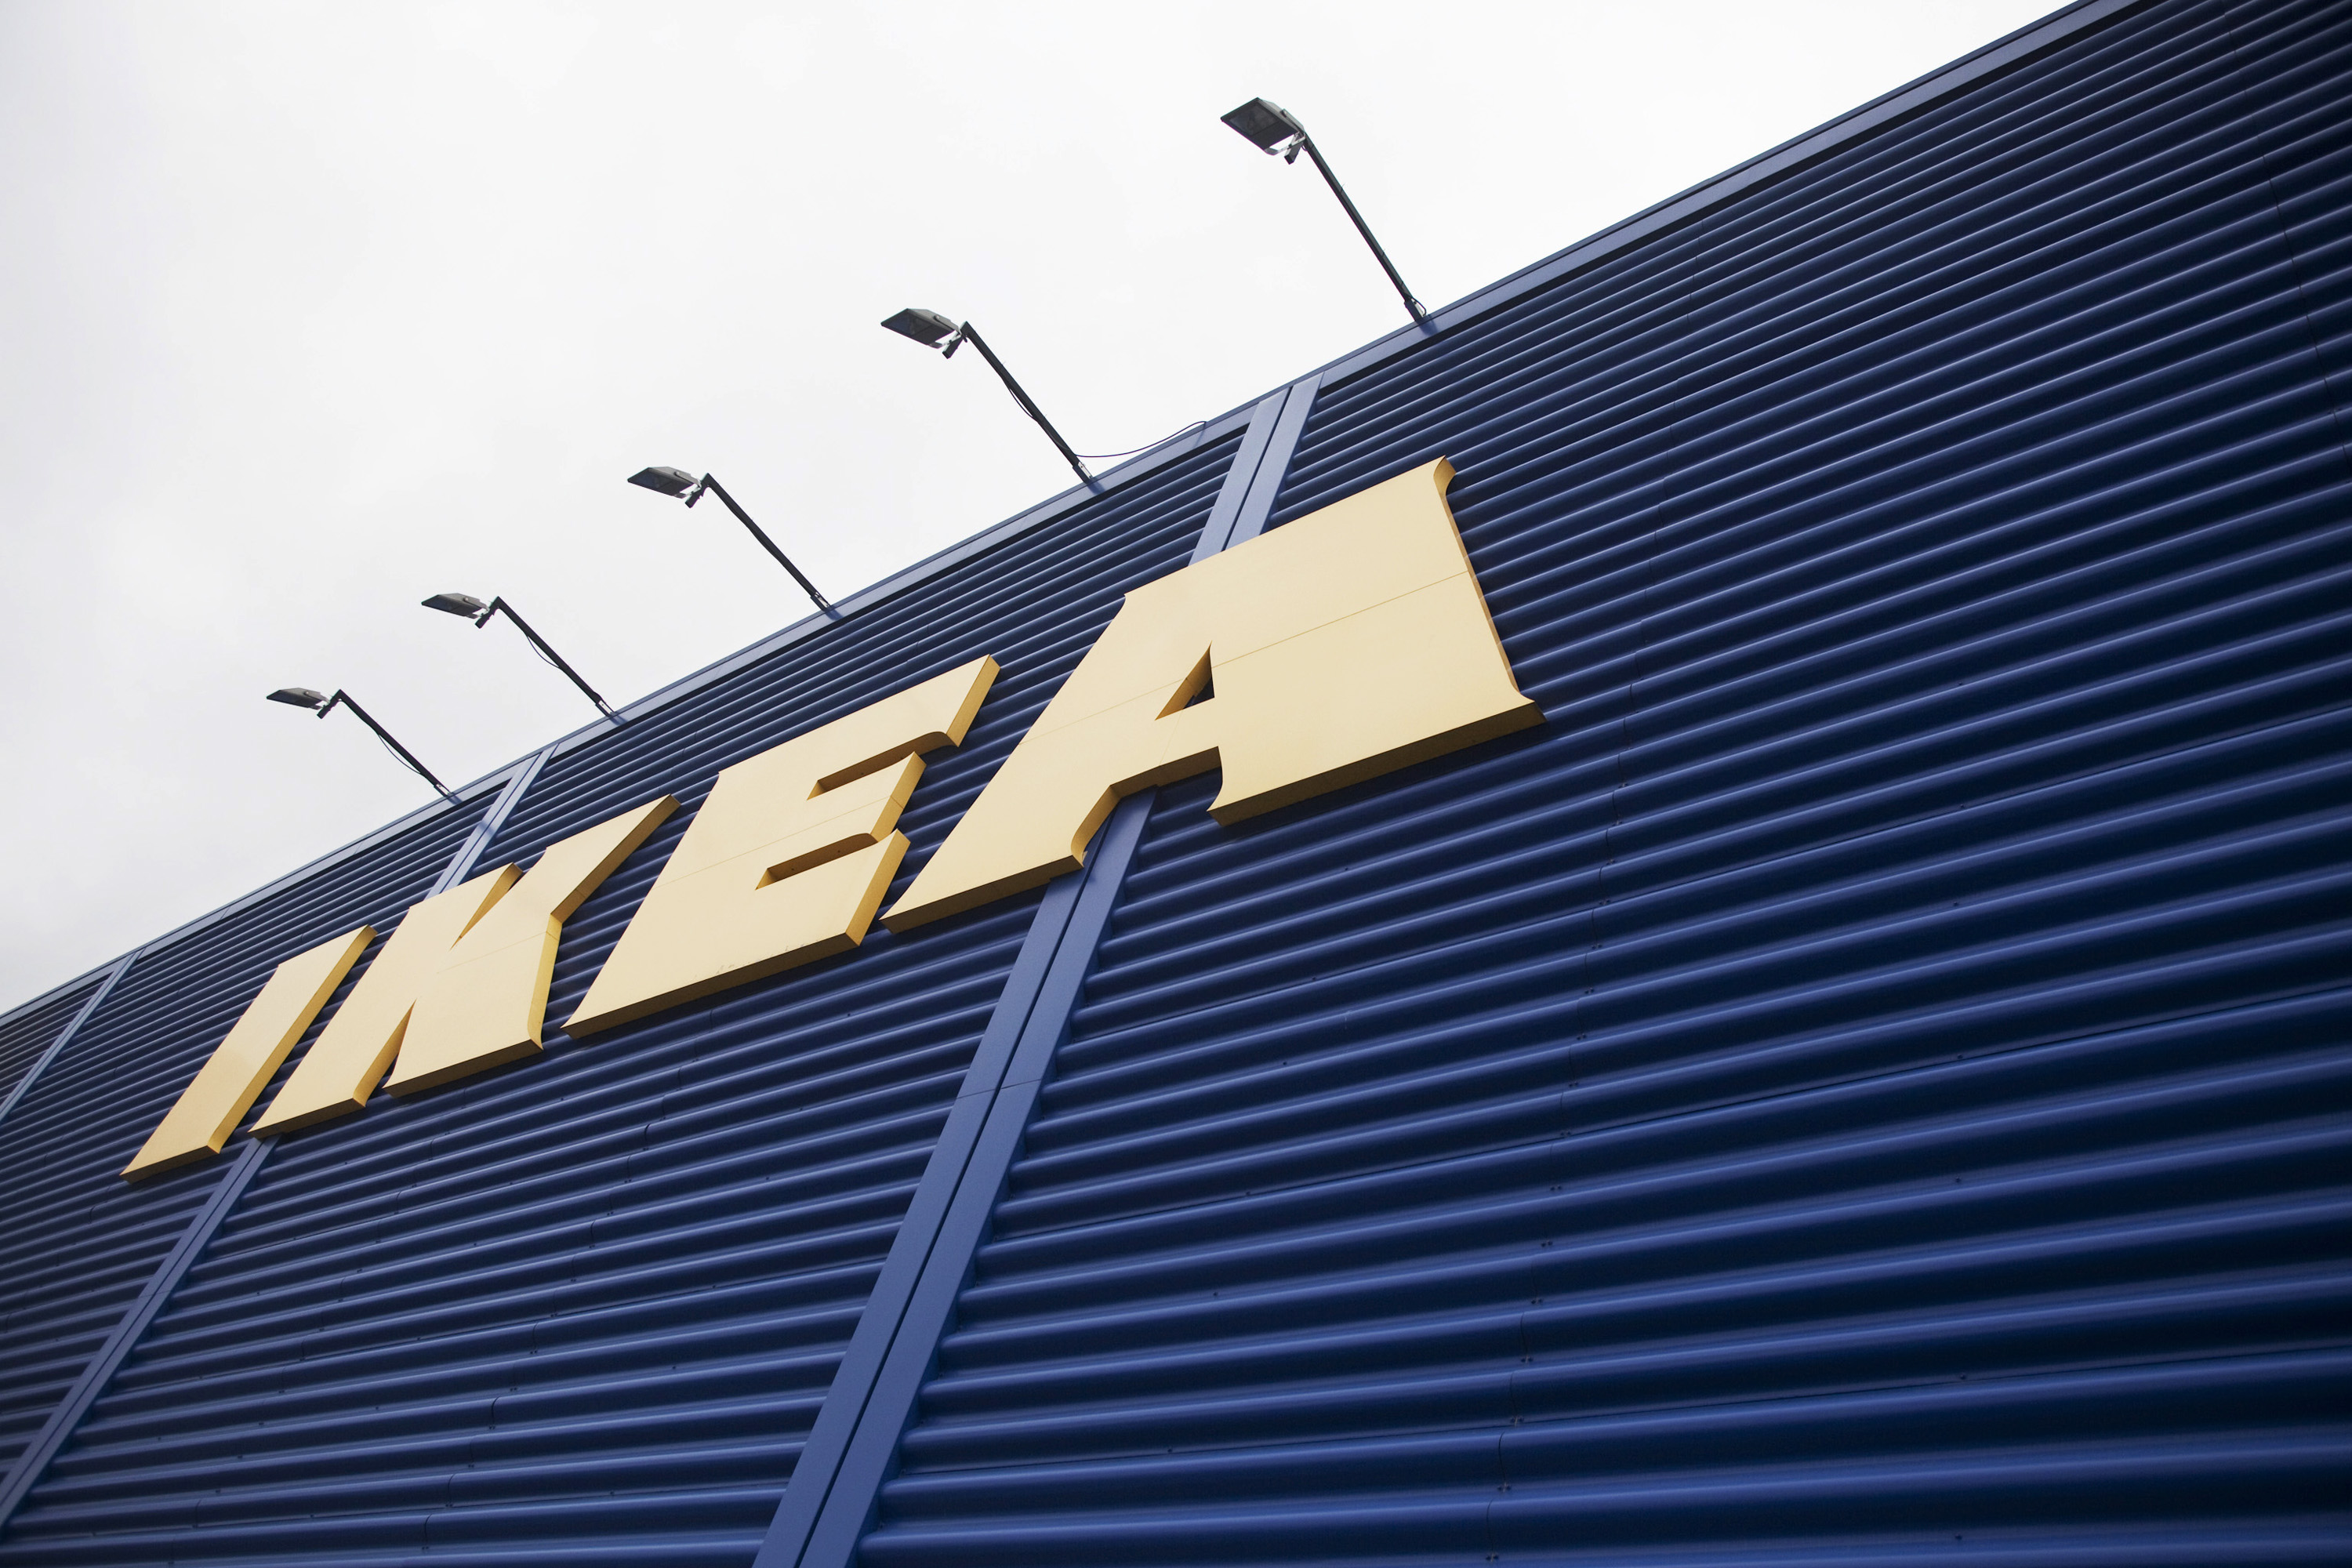 Ikea Investing $3 Billion to Make It Easier to Buy Online